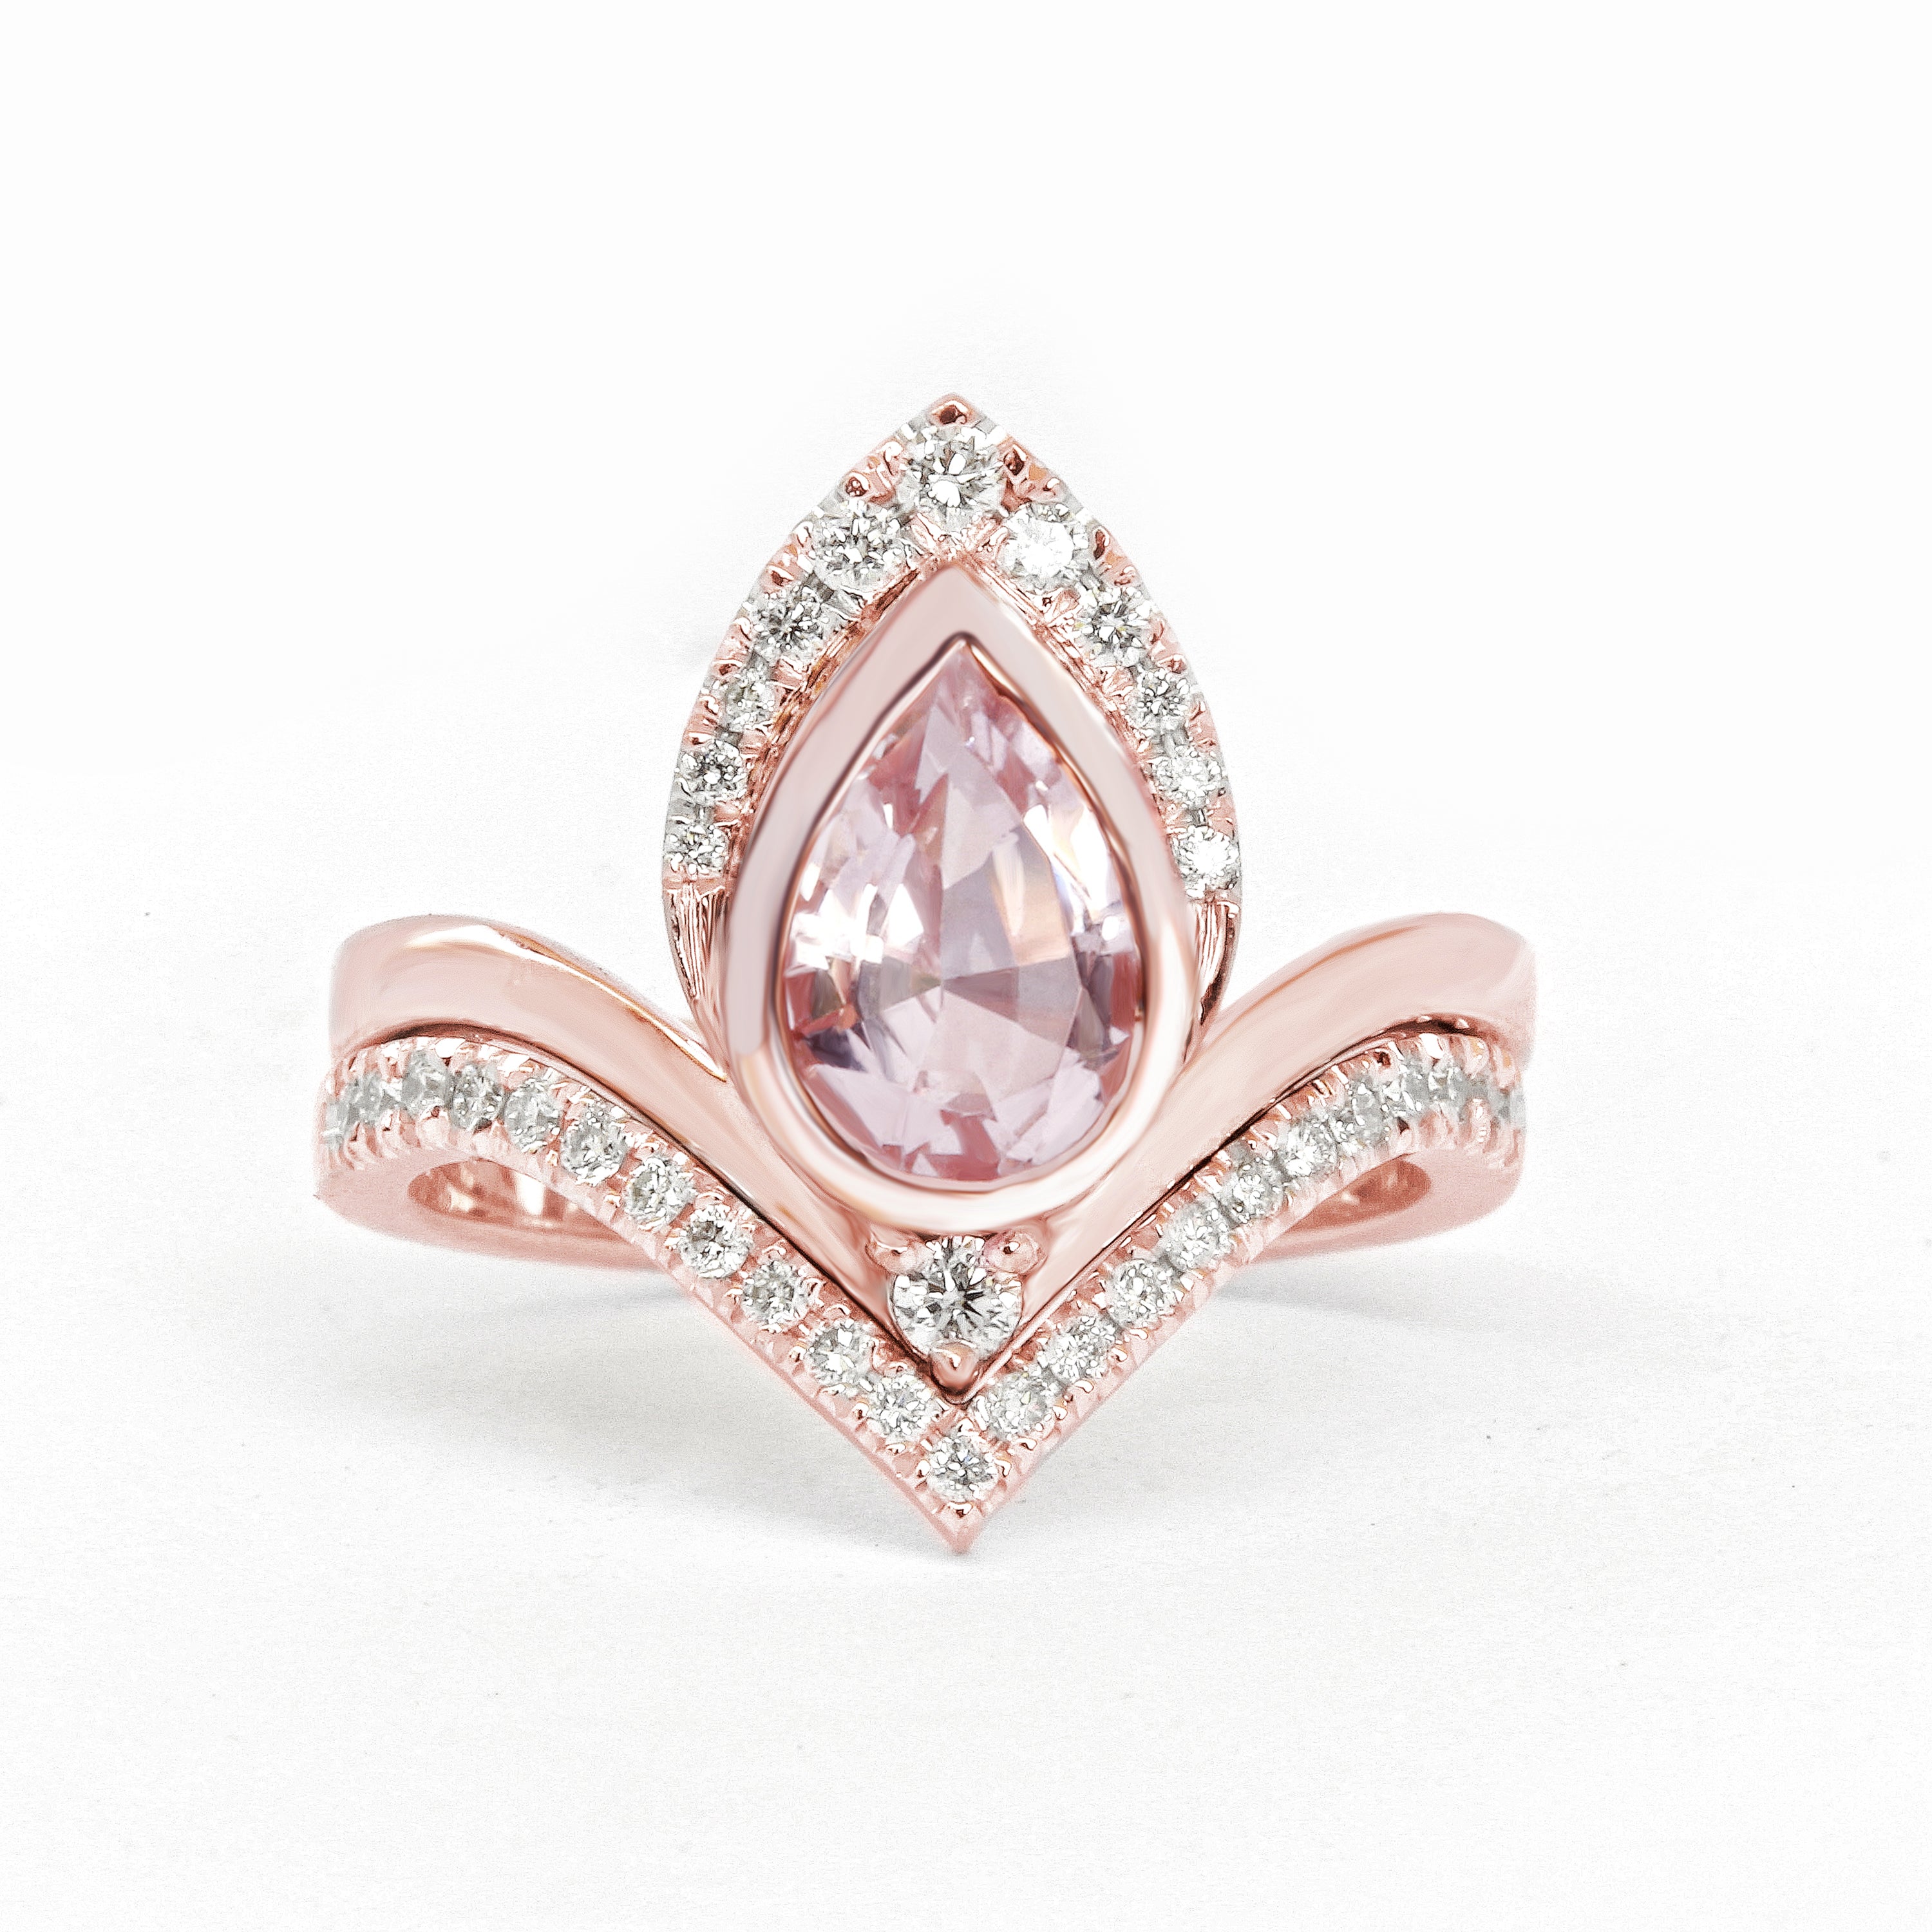 Morganite – The most popular Gemstone Engagement ring for nontraditional brides